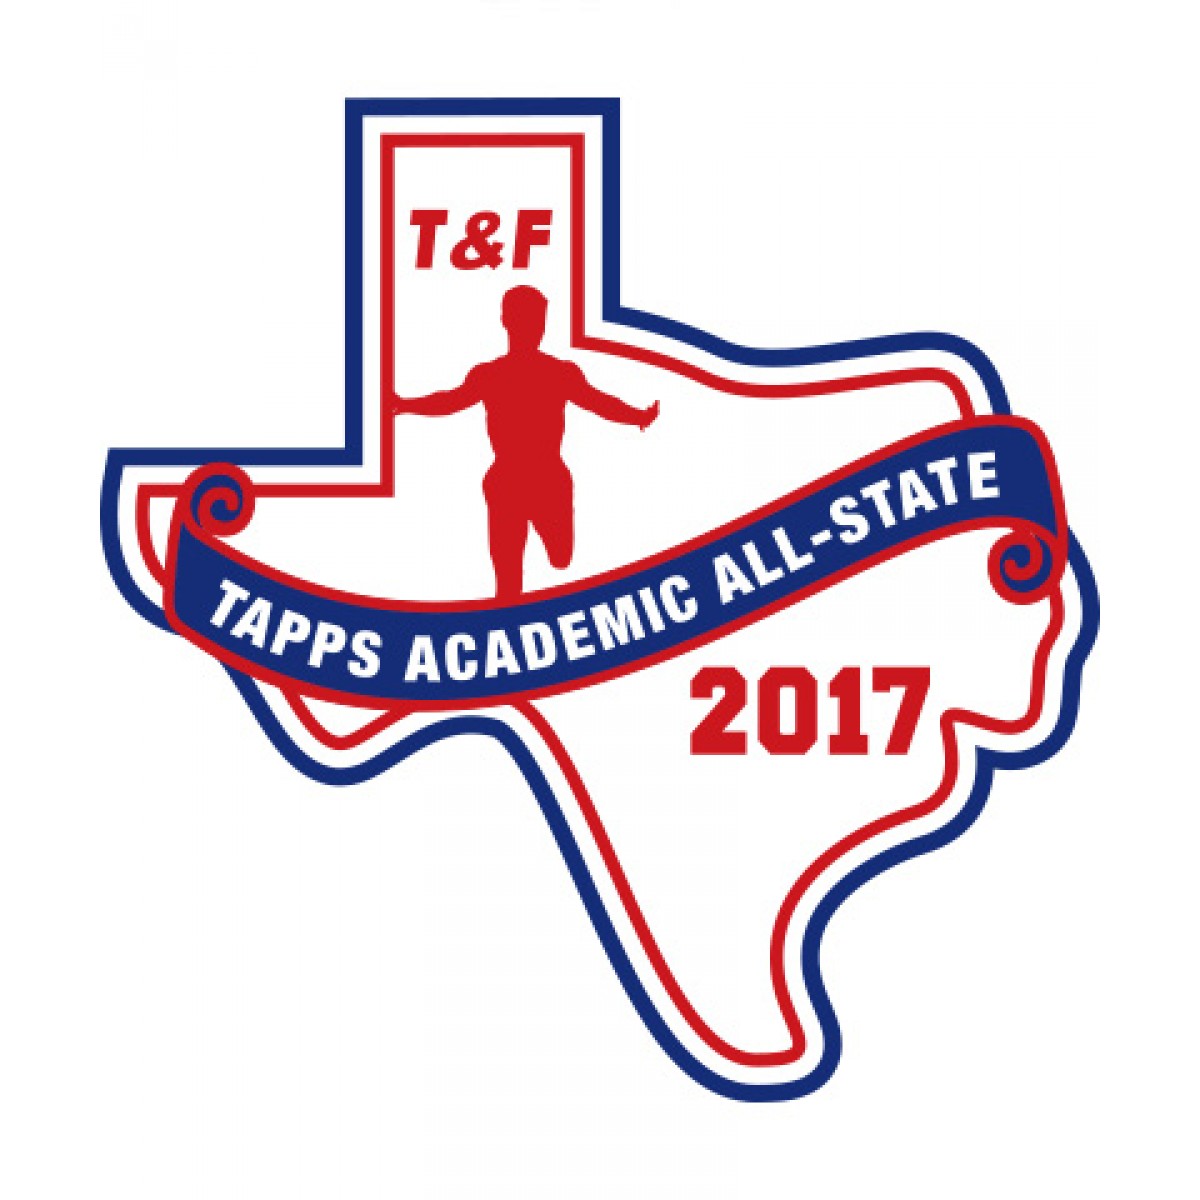 Felt 2017 TAPPS Academic All-State T&F Patch